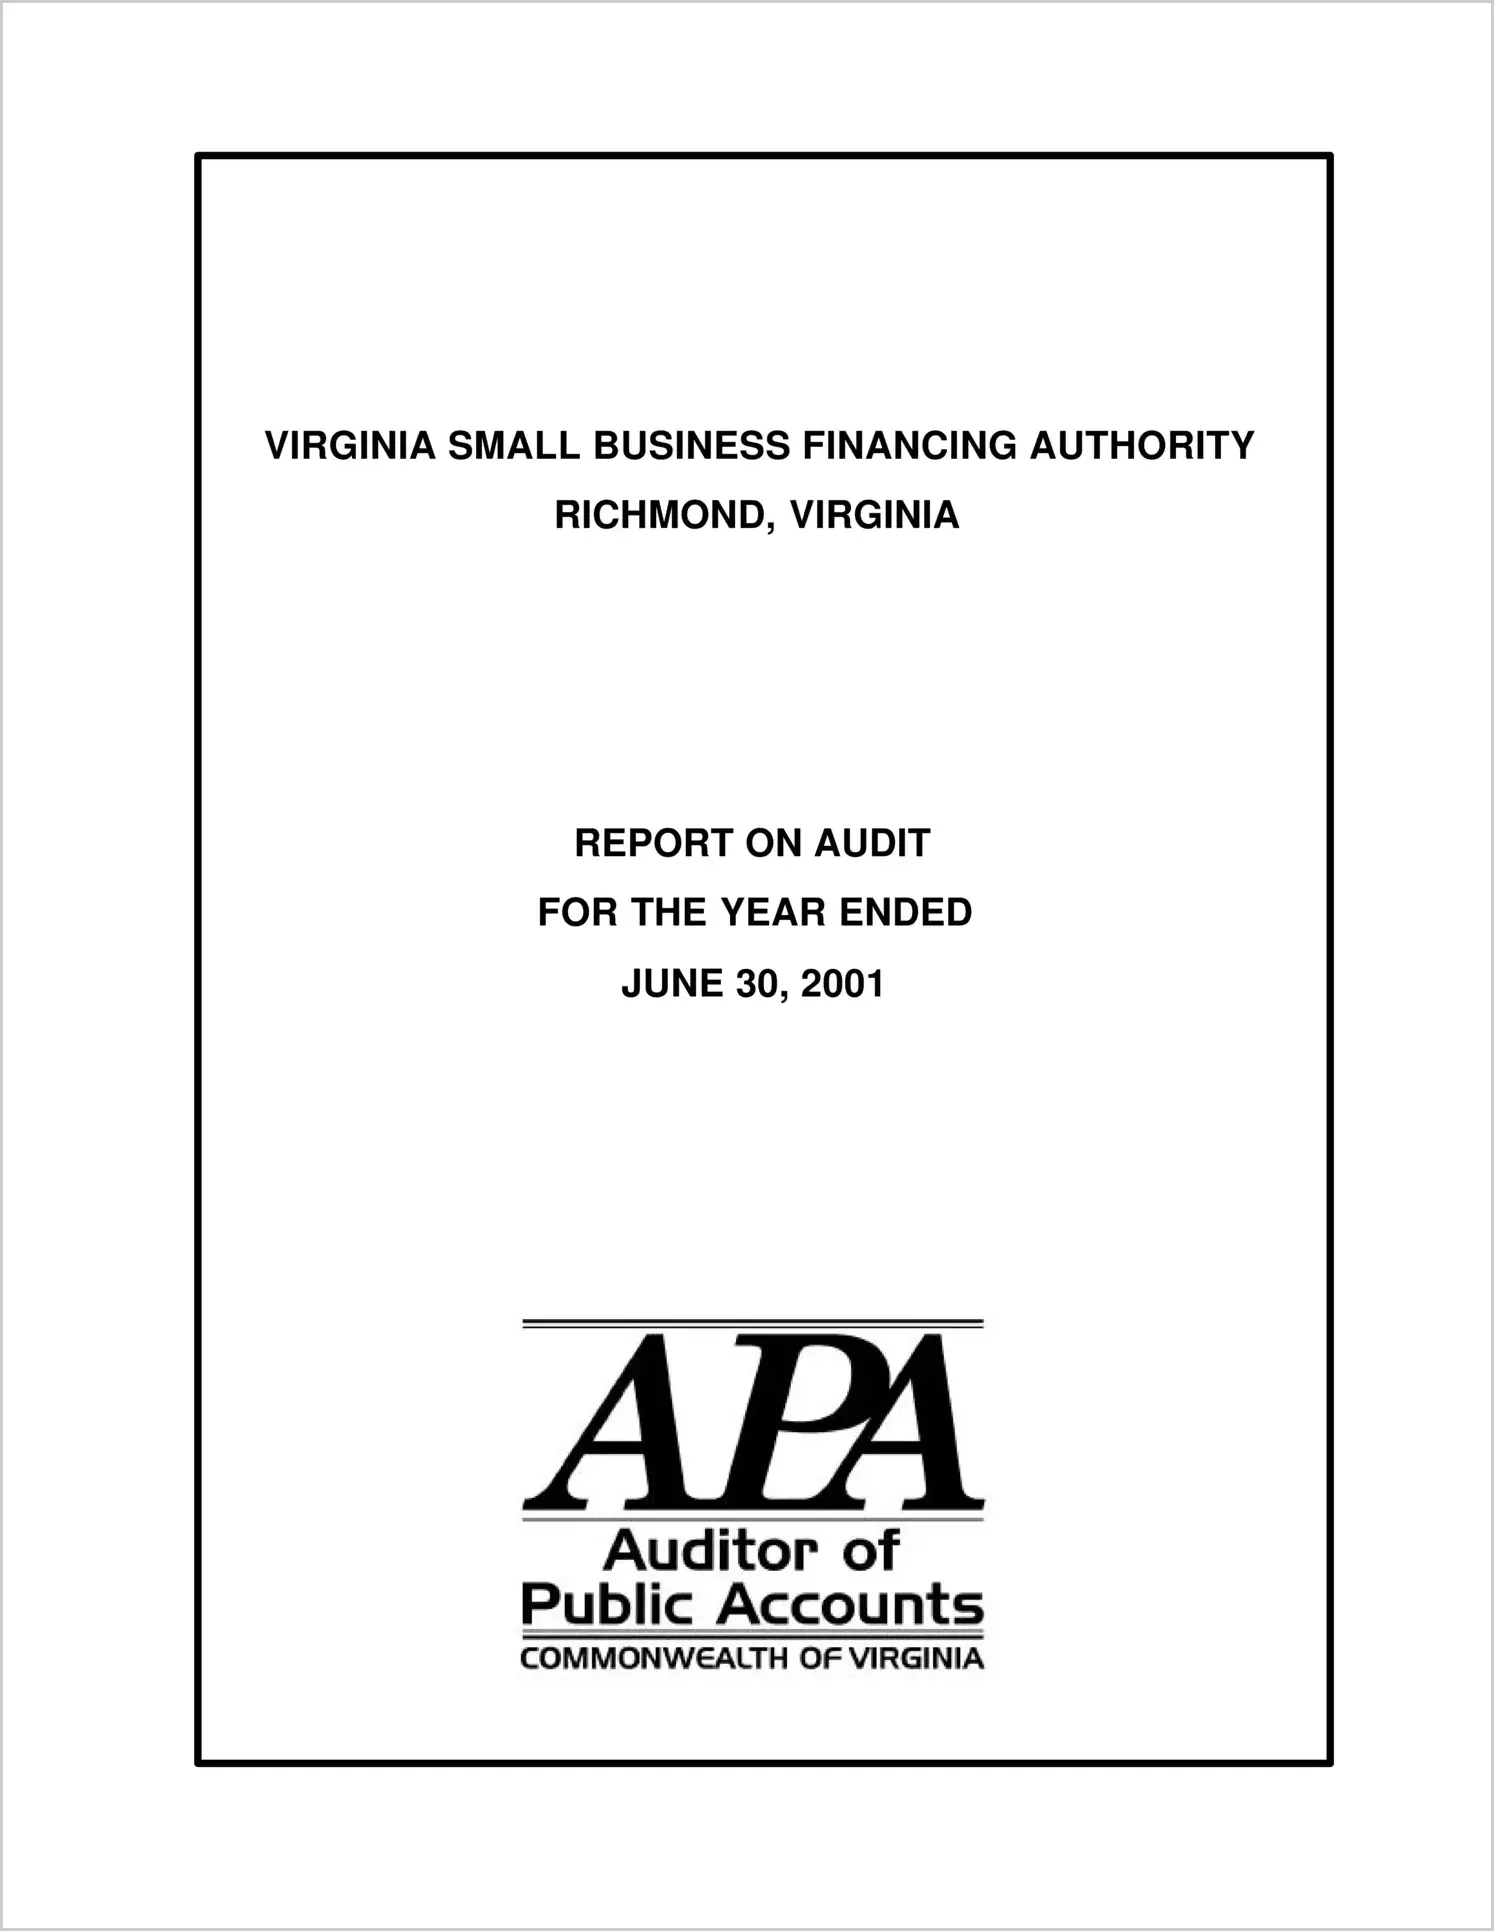 Virginia Small Business Financing Authority for the year ended June 30, 2001